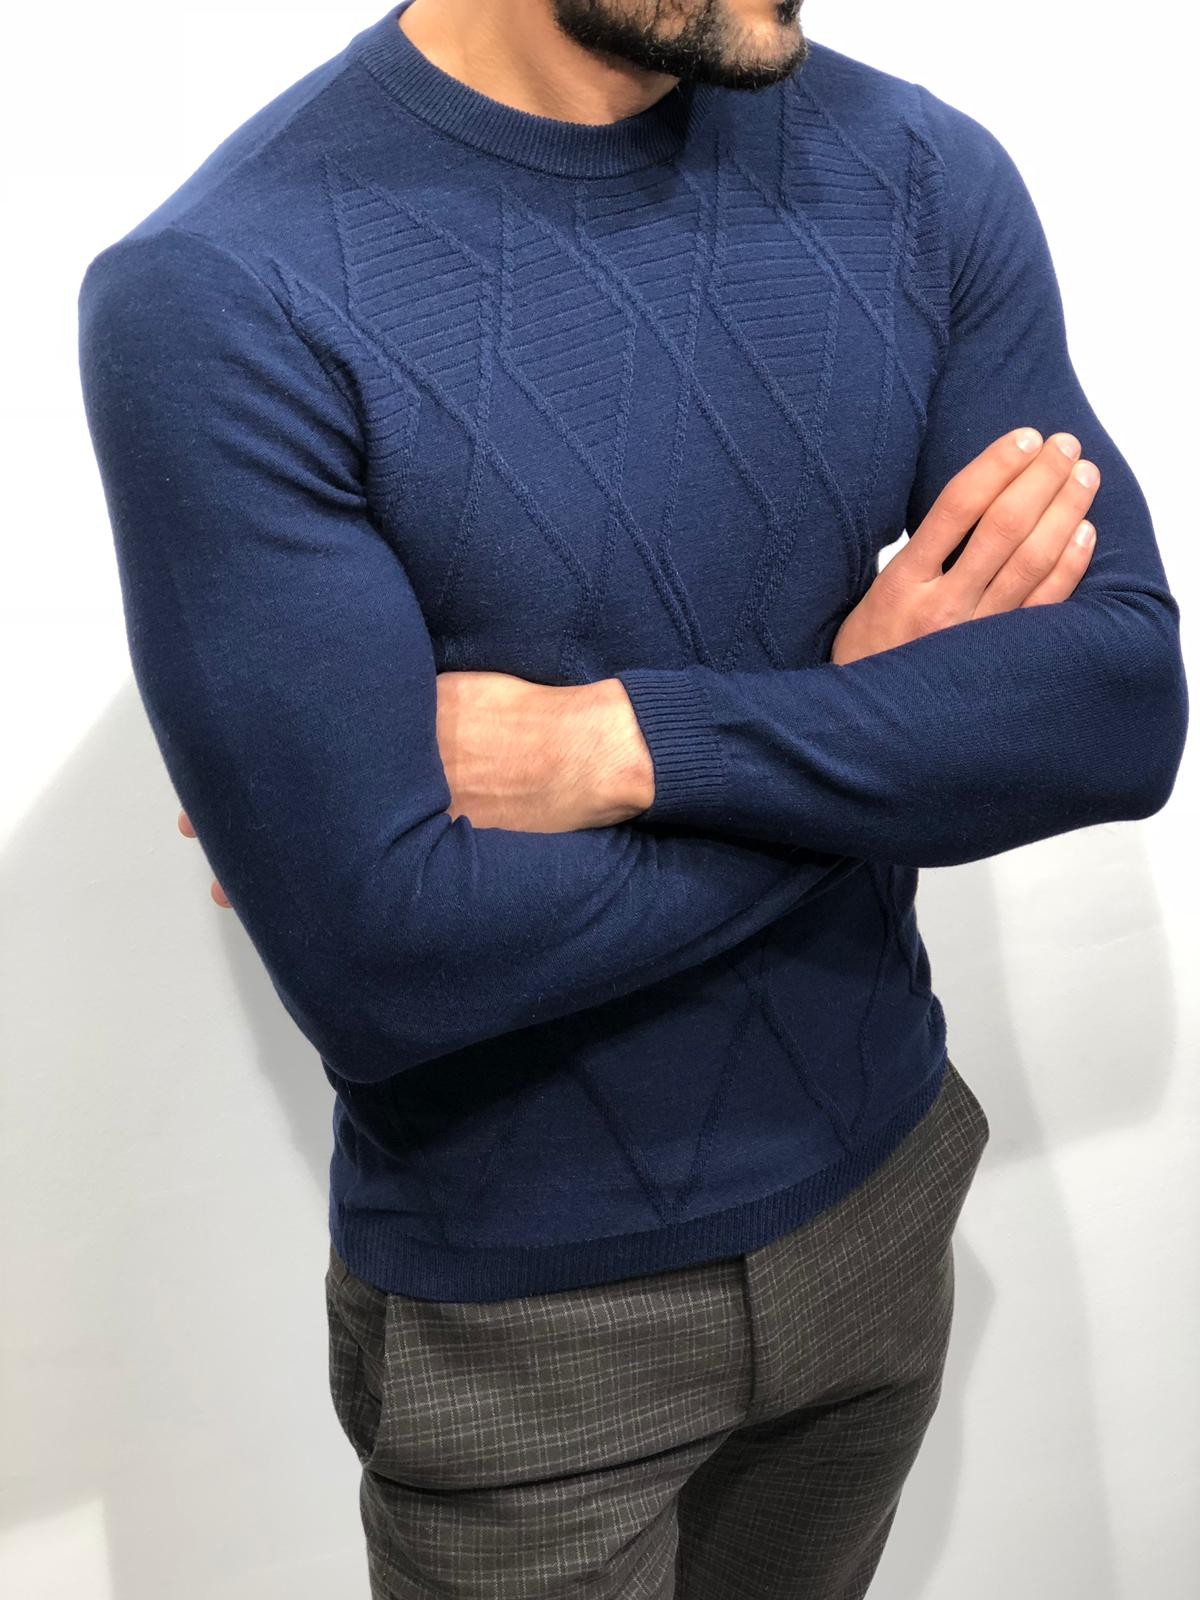 Buy Indigo Slim Fit Sweater by Gentwith.com with Free Shipping